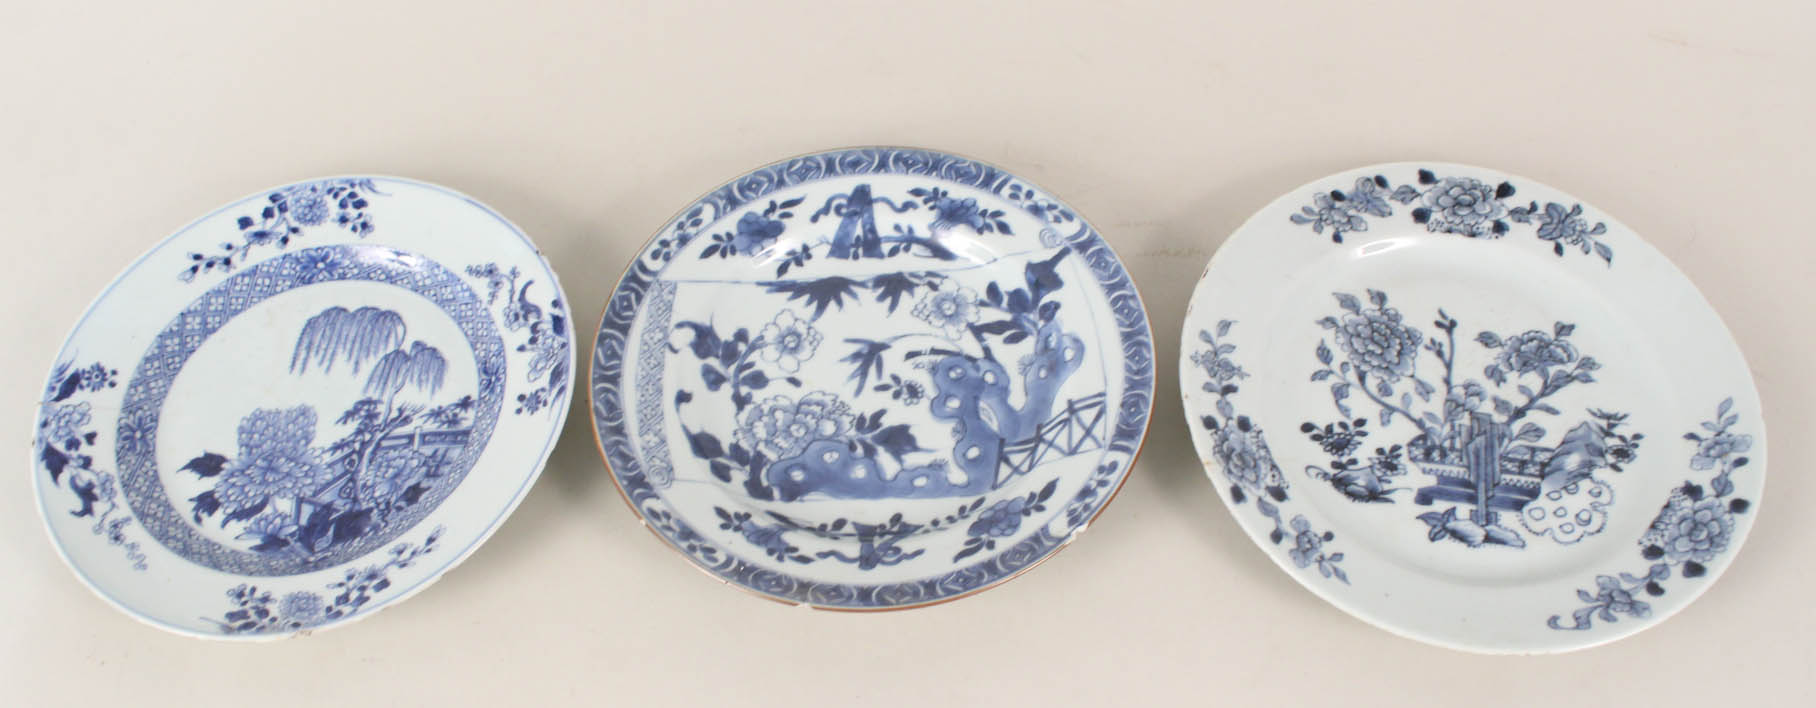 Three 18th Century Chinese blue and white plates (as found)